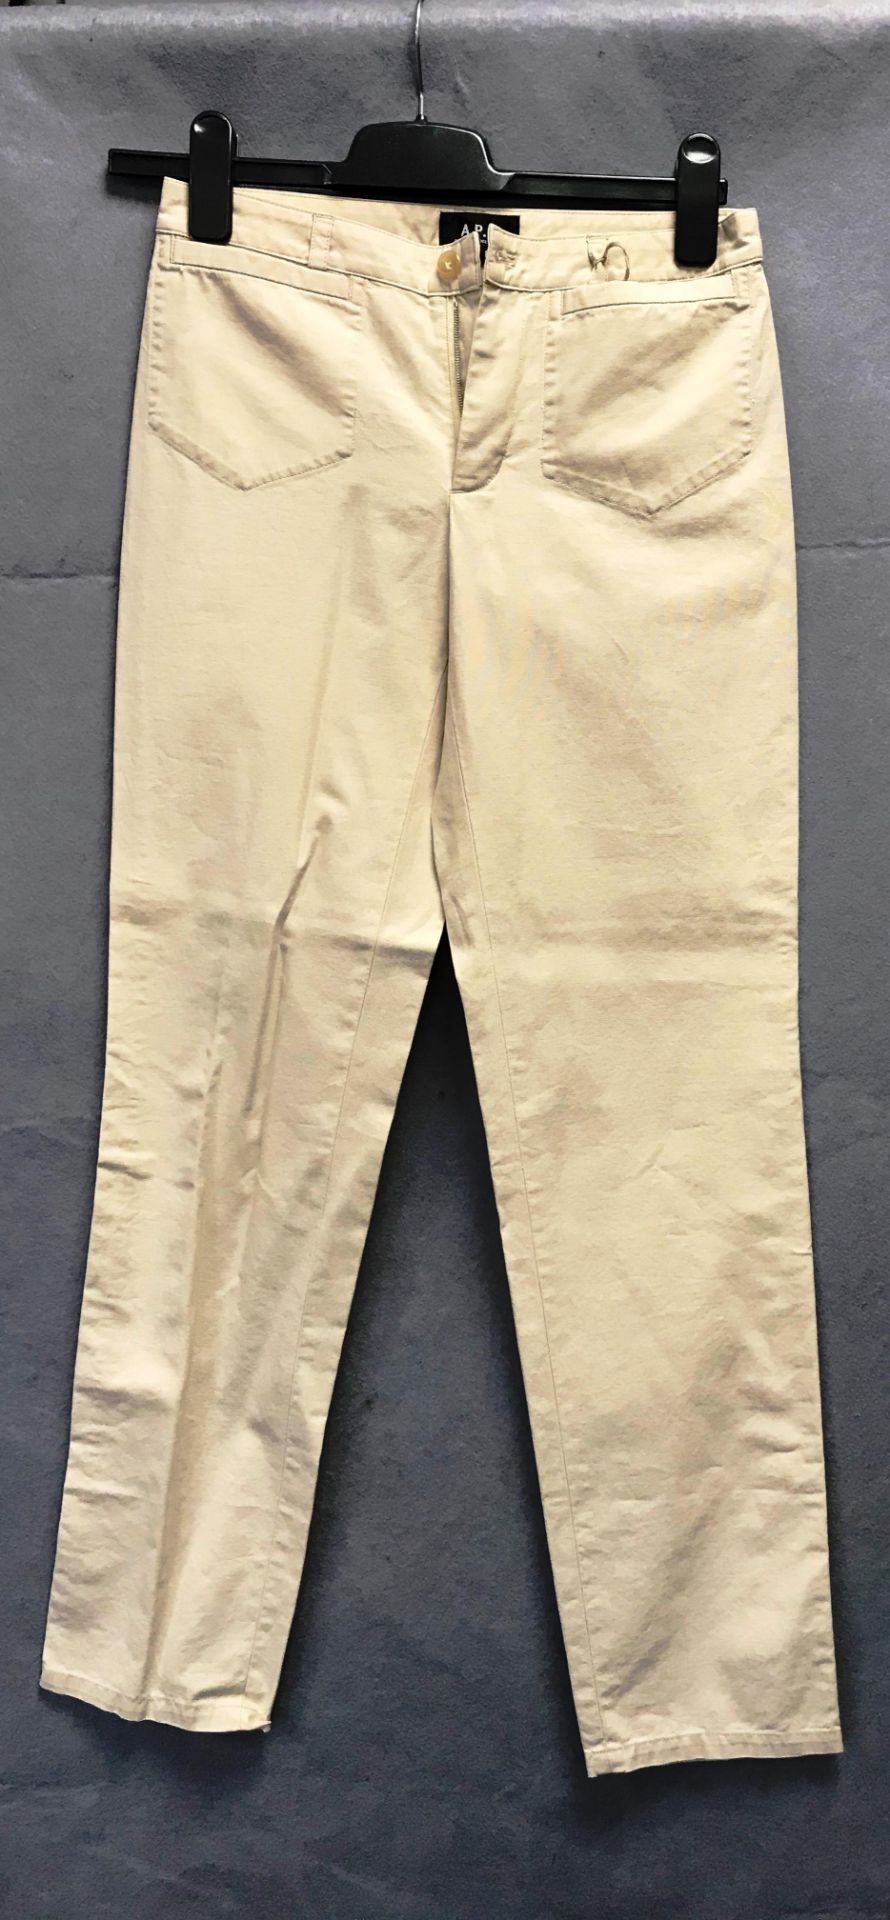 5 x assorted pairs of ladies trousers/jeans by APC, Bleu L'Azur, etc. - Image 3 of 5